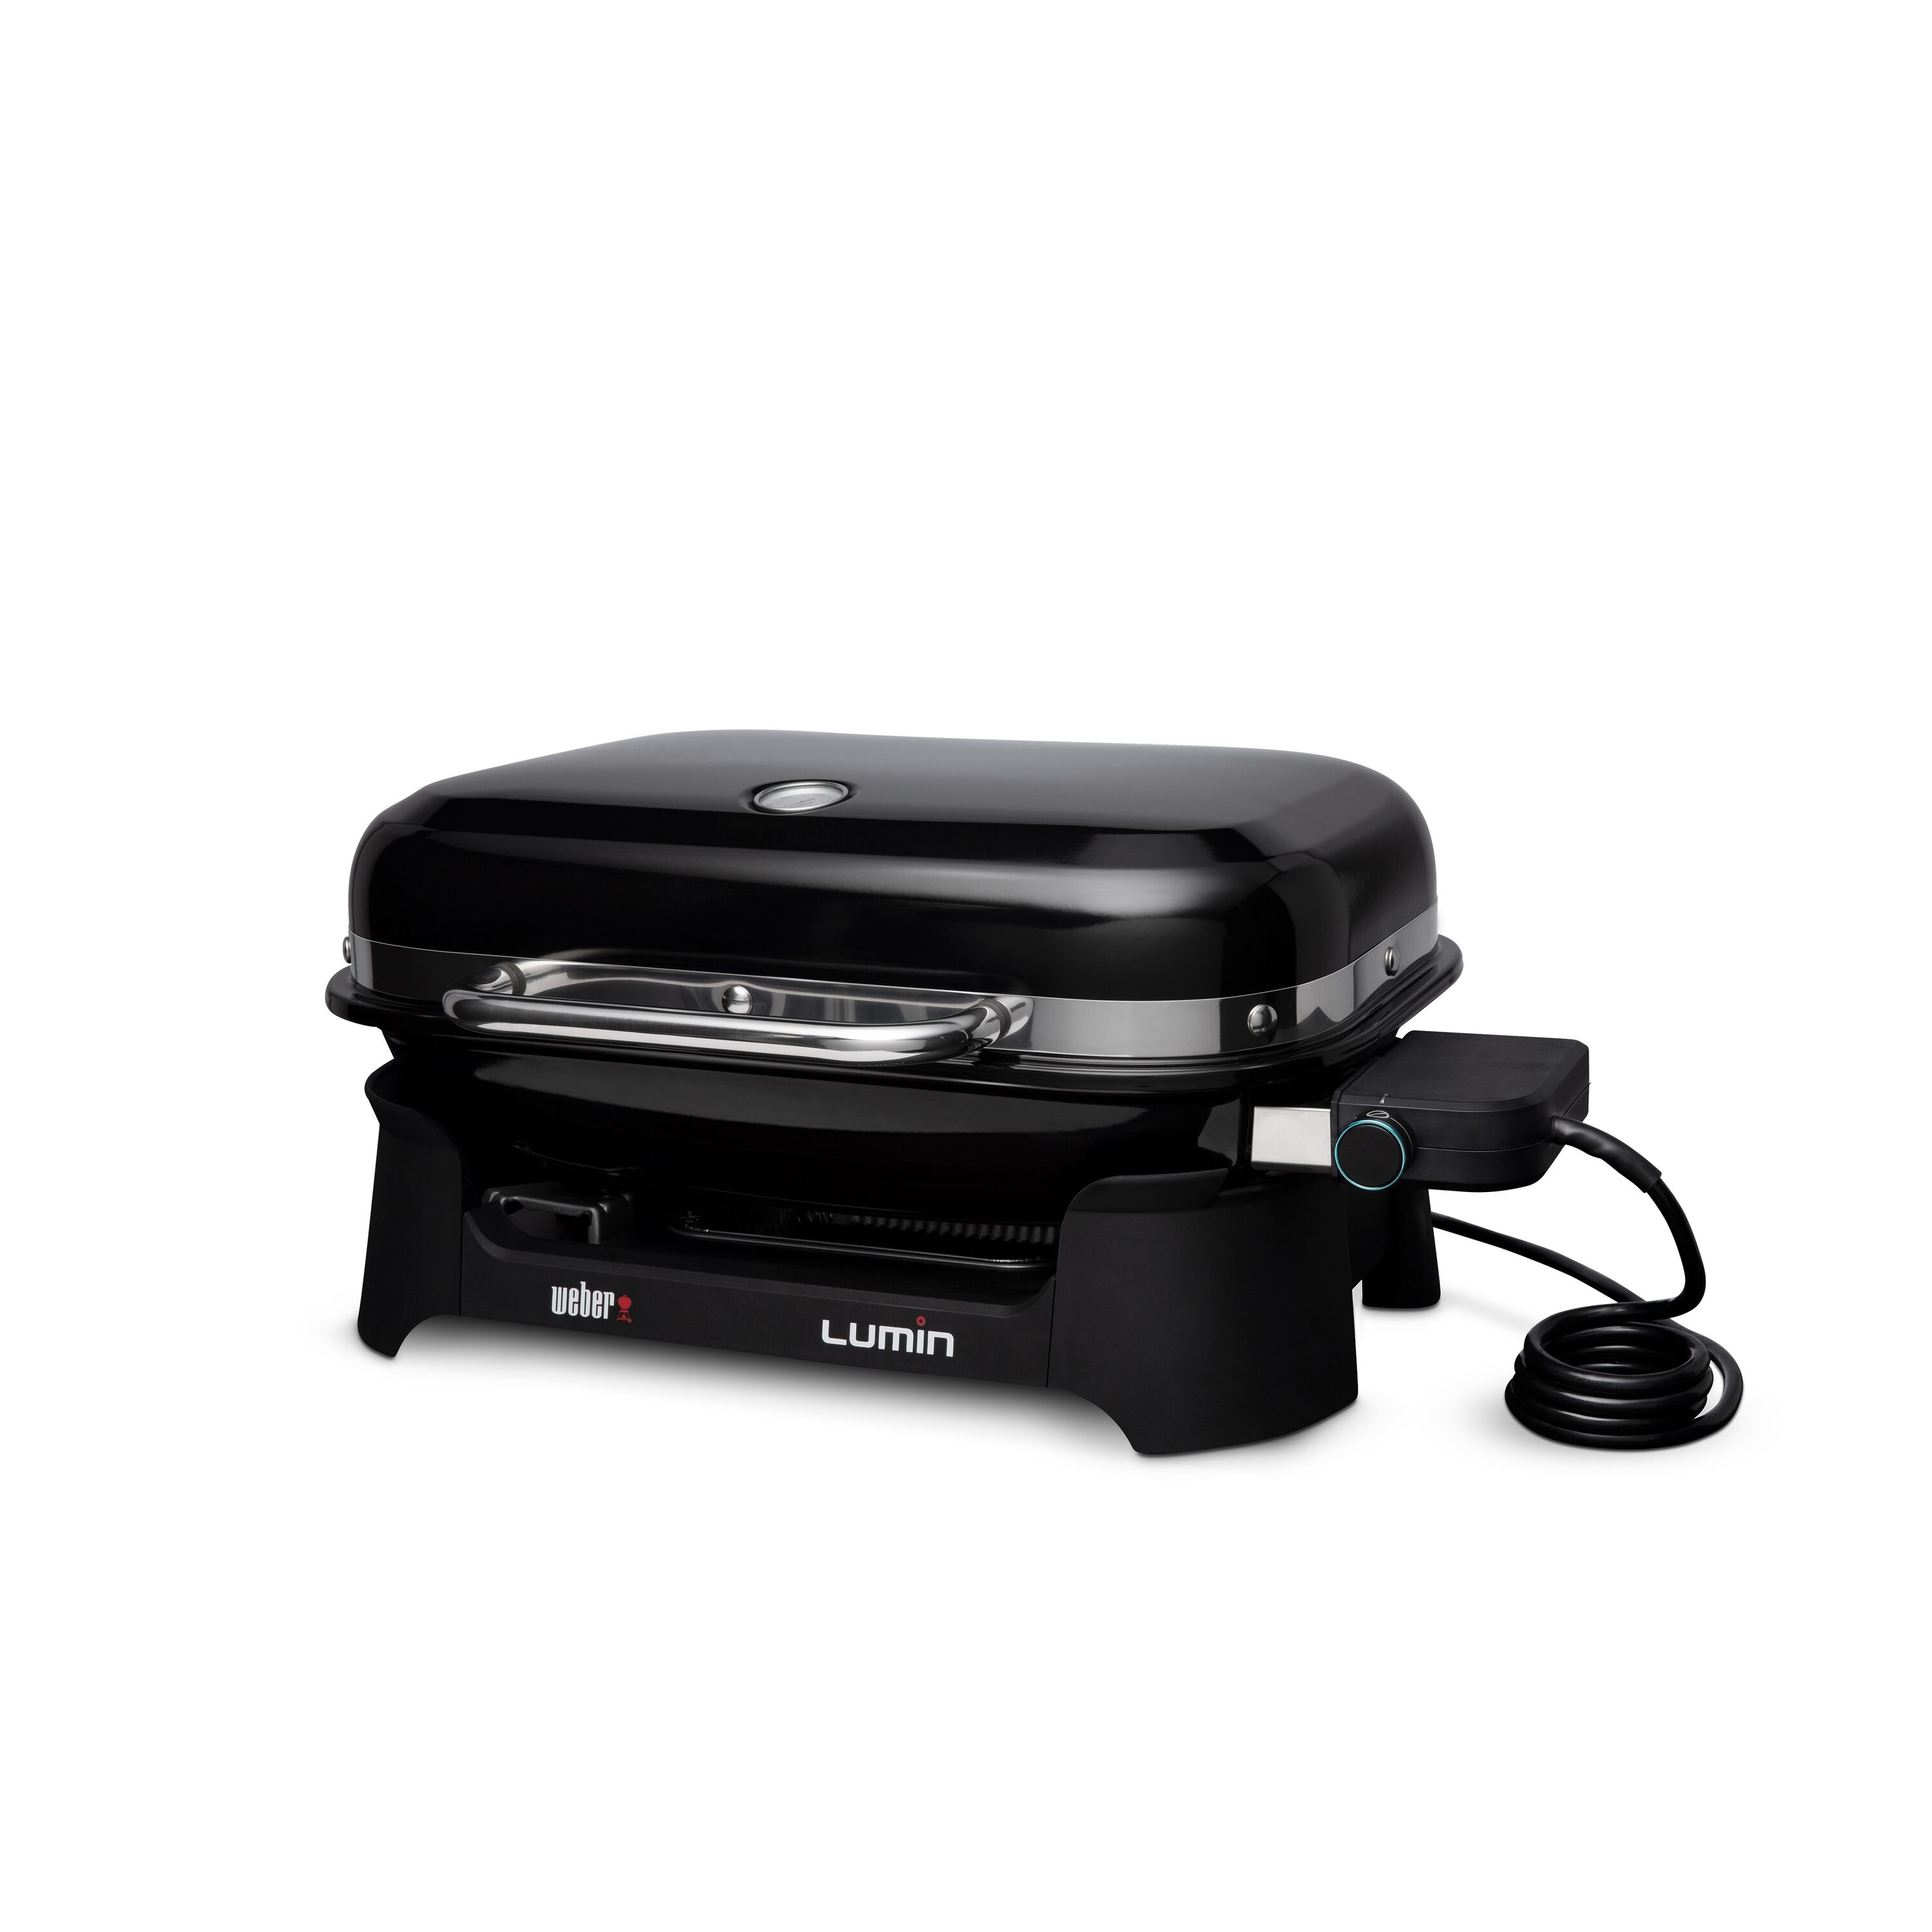 Weber Electric Grills at